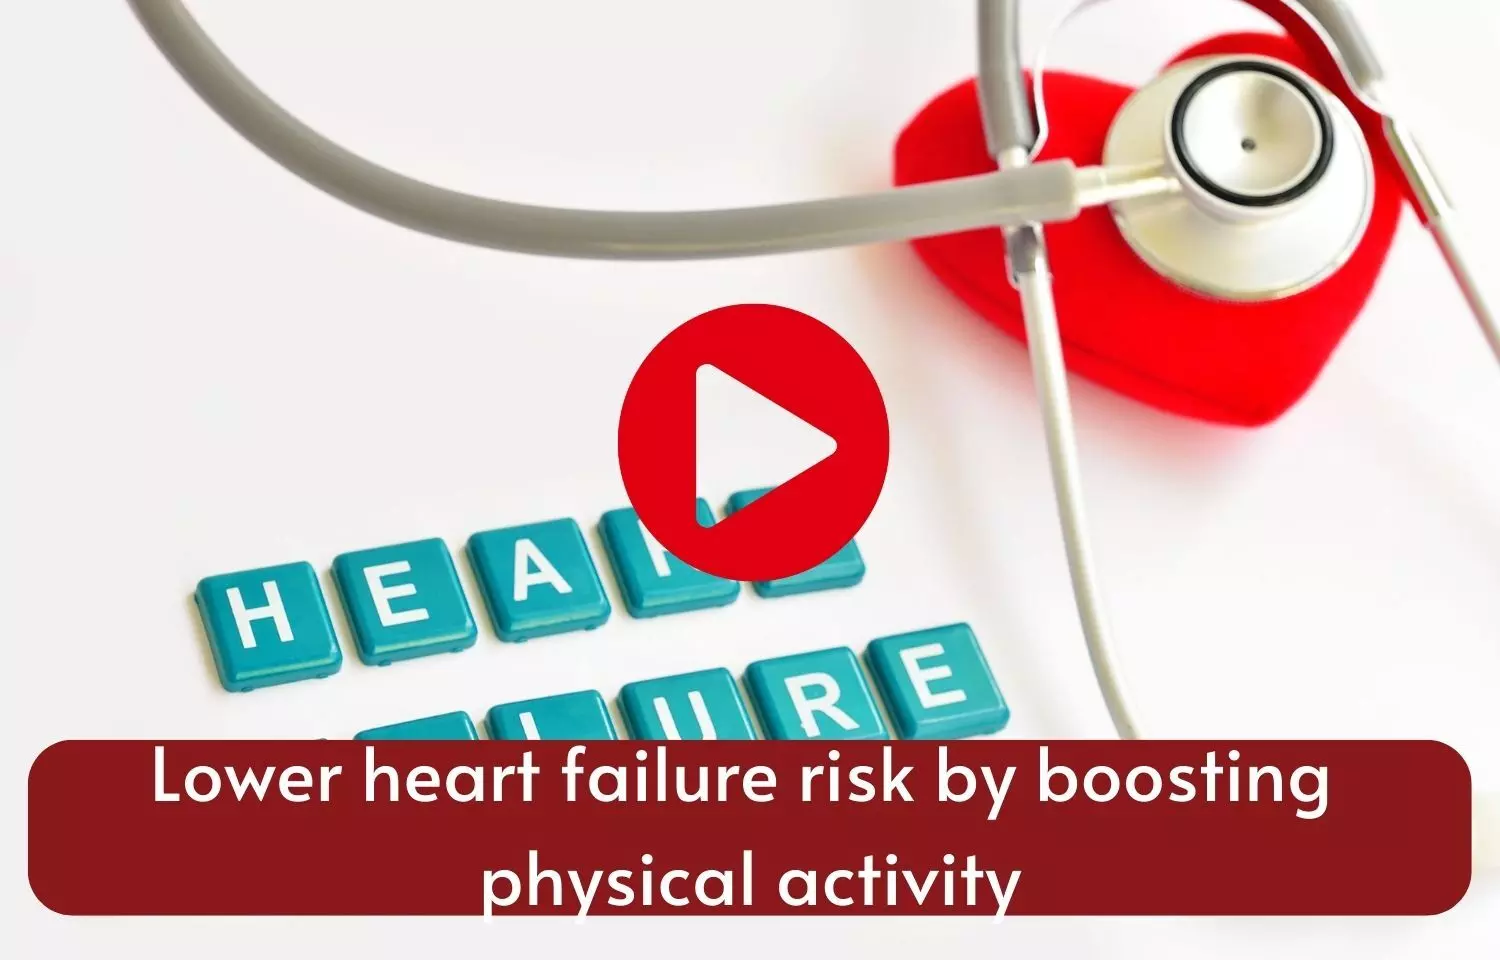 Boosting physical activity may reduce risk of heart failure